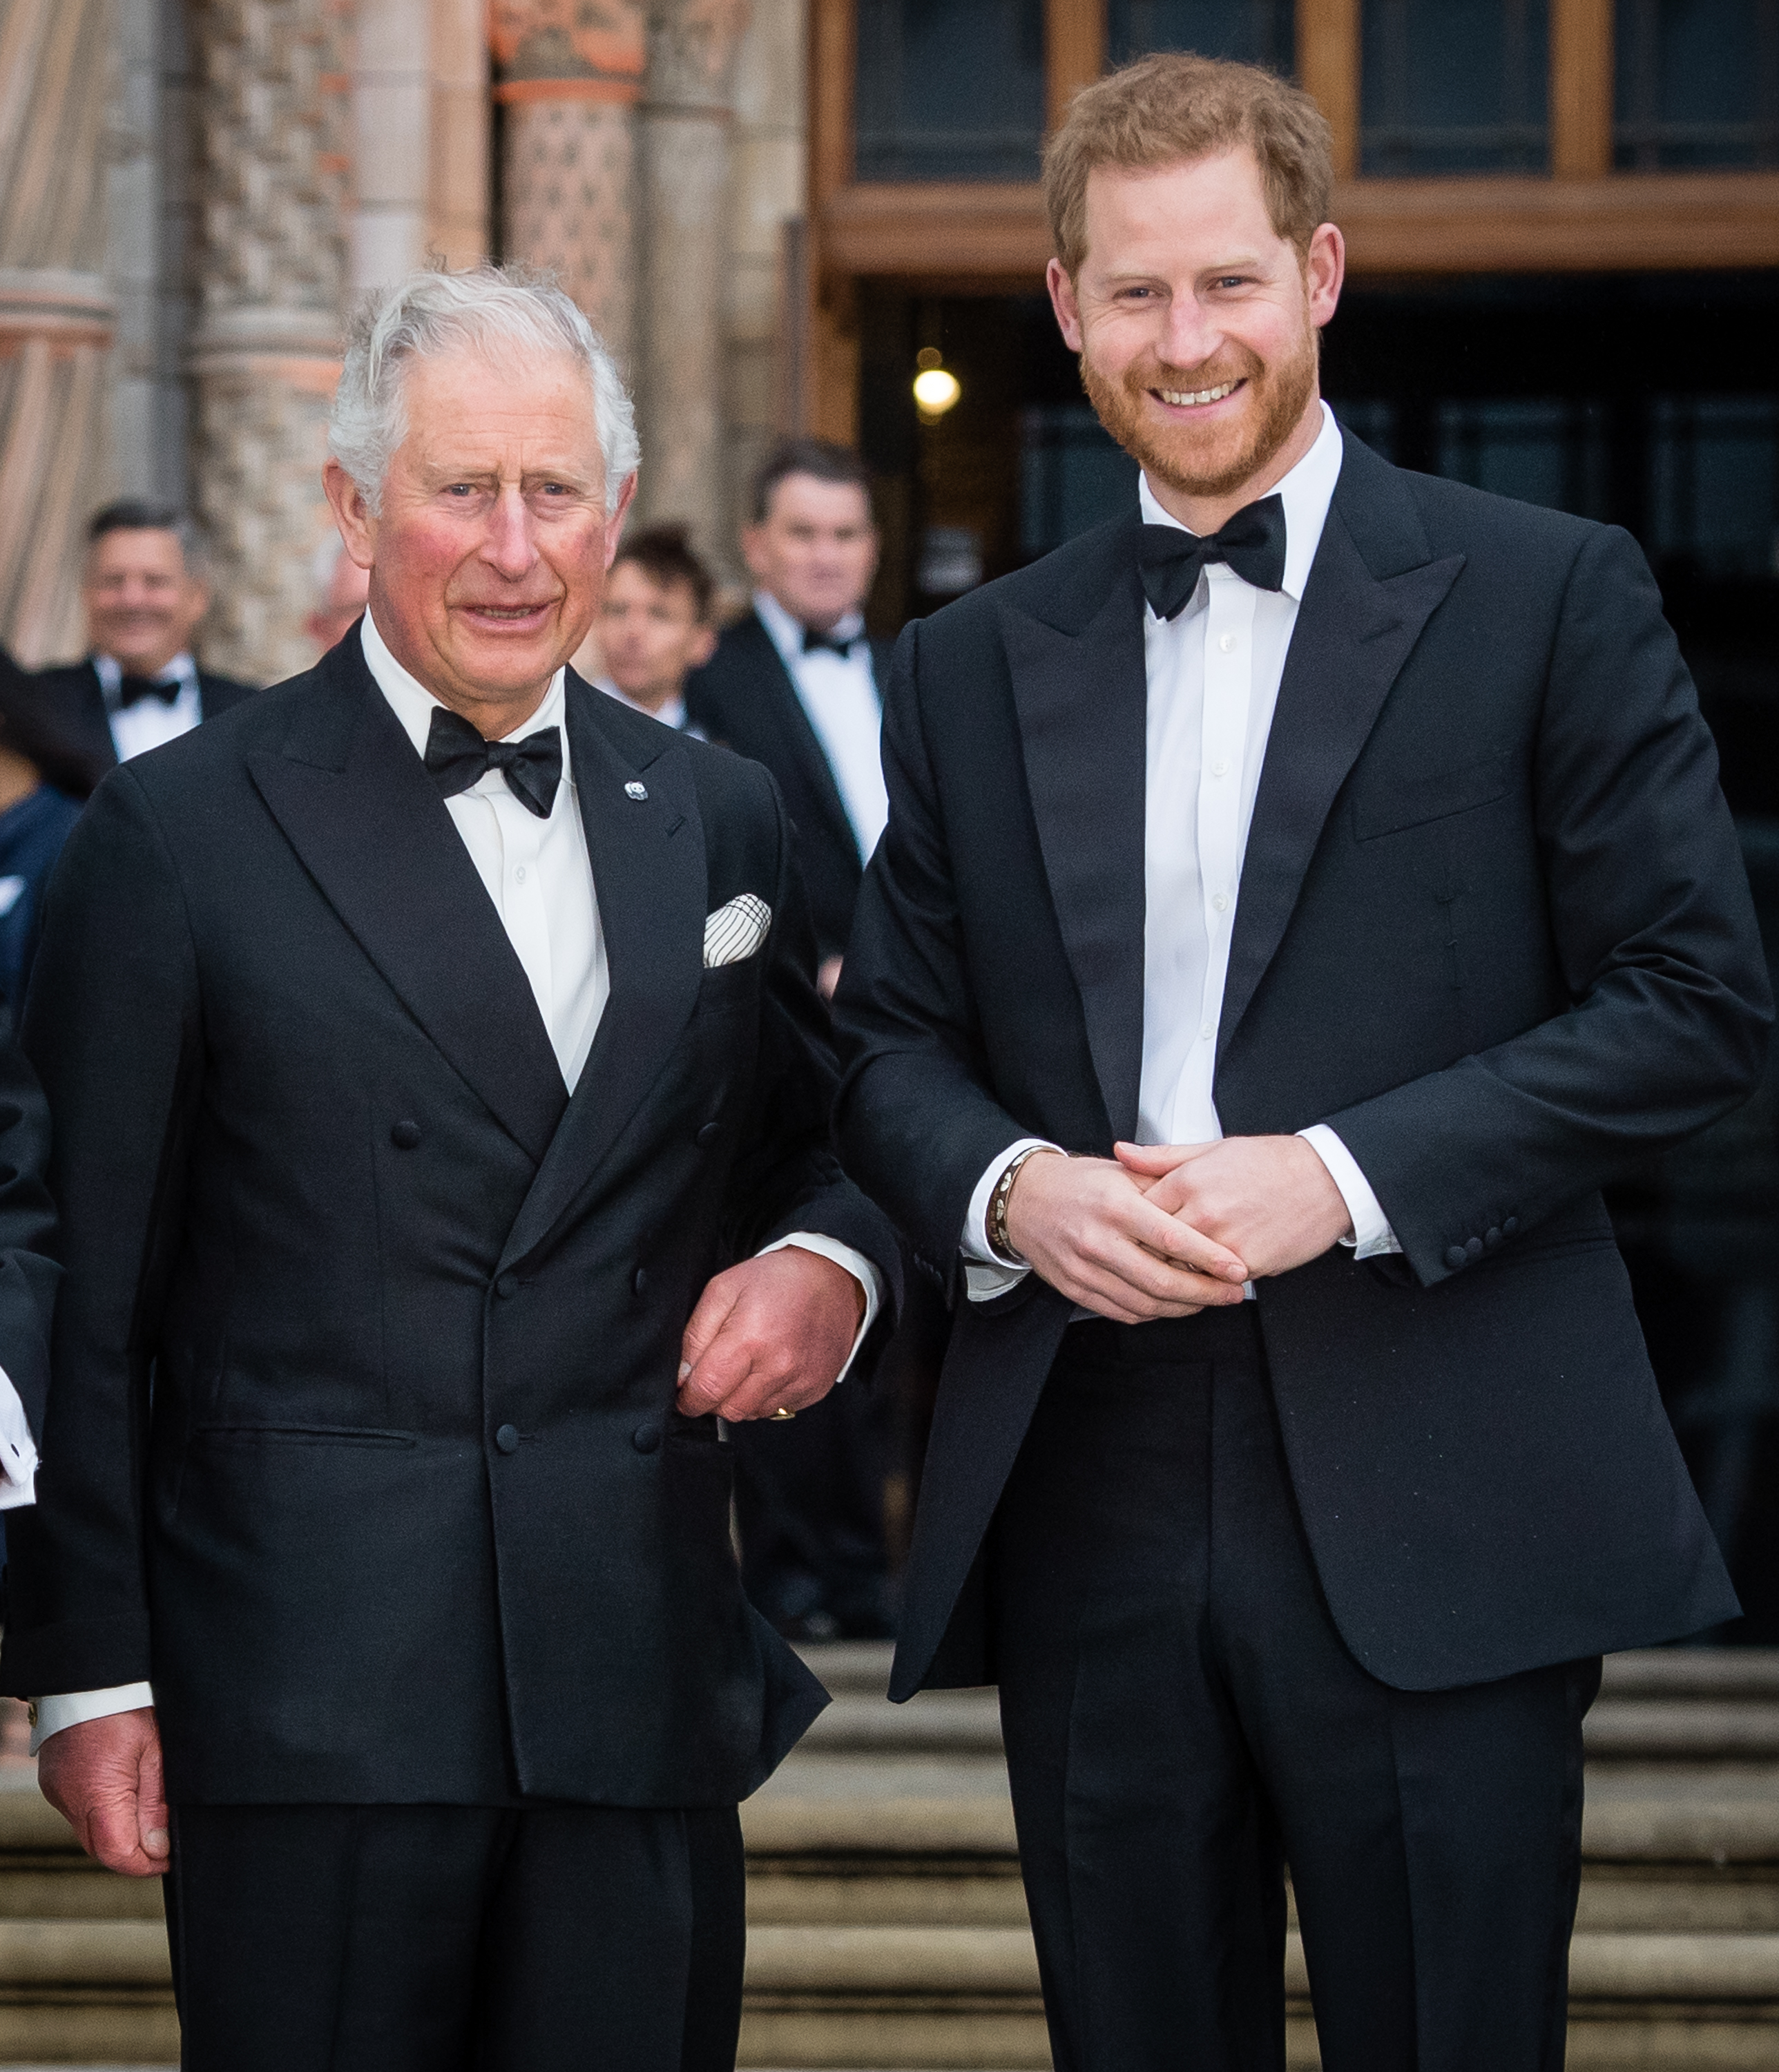 King Charles and Prince Harry, Duke of Sussex at Natural History Museum on April 04, 2019, in London, England. | Source: Getty Images